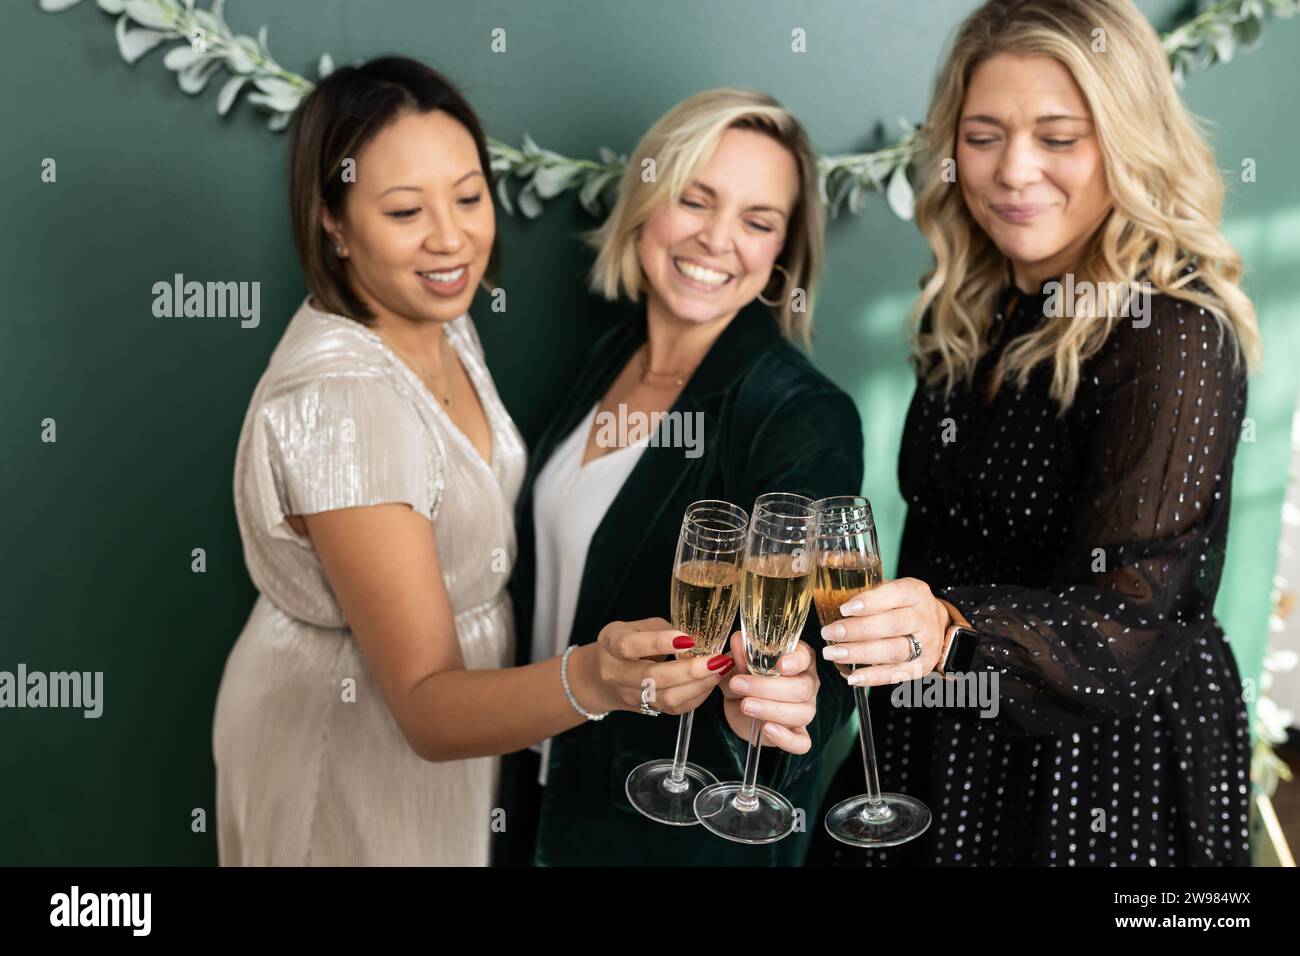 Three women holding champagne flutes toasting each other Stock Photo